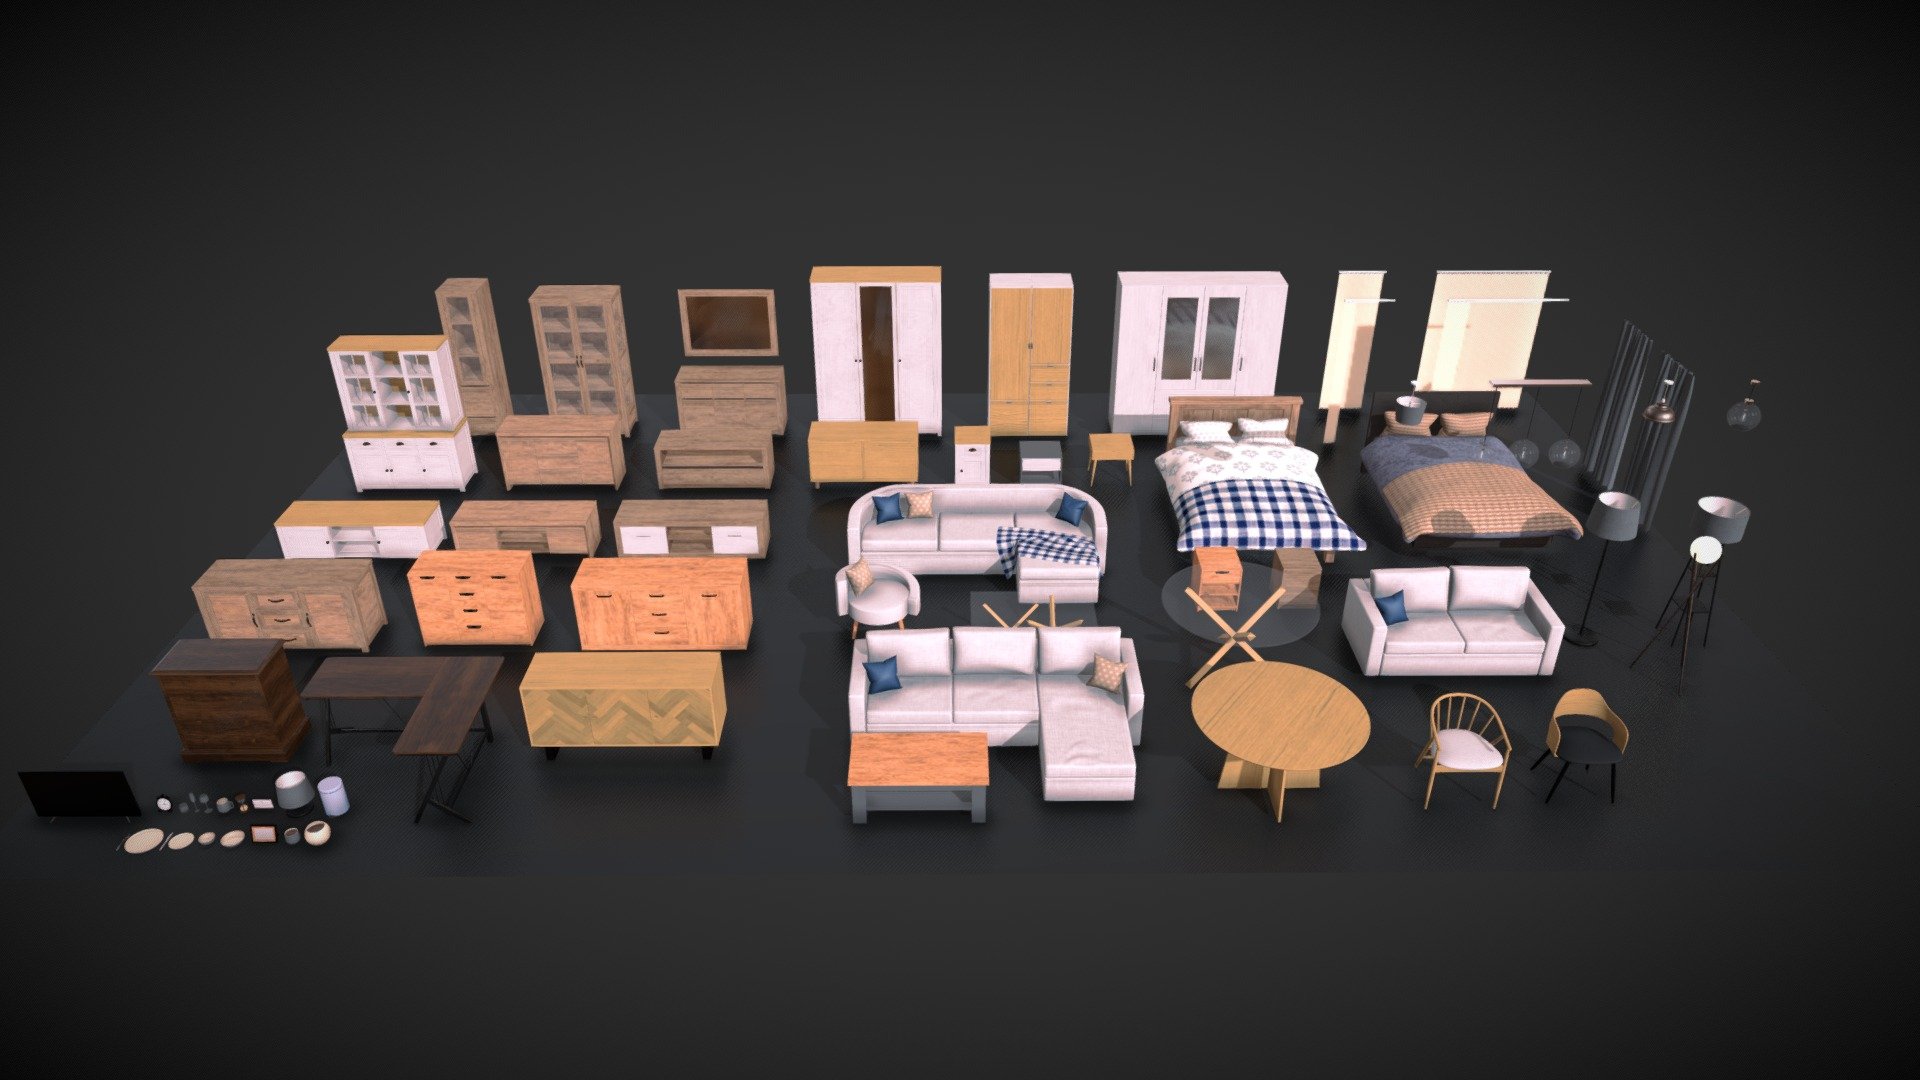 This furniture asset pack contains cupboards, wardrobes, sofas, beds, tables and more, all modelled and textured in blender all with non-overlapping UVs ready for light baking.

For Seprated Model Sets:

Living Room Furniture Set 1 - https://sketchfab.com/3d-models/living-room-furniture-set-5da1f8ab6a2f4337b6daf44d1a7efe0e

Living Room Furniture Set 2 - https://sketchfab.com/3d-models/living-room-furniture-set-3493e195044a4af4b4cb0795fc02a848

Table and Chairs Dining Set 1 - https://sketchfab.com/3d-models/table-and-chairs-dining-set-348aa60714f2453a80205853cff962da

Table and Chairs Dining Set 2 - https://sketchfab.com/3d-models/table-and-chairs-dining-set-f3e4652bd8754047810c7e7f0c12841c

Bedroom Furniture Set - https://sketchfab.com/3d-models/bedroom-furniture-set-74e480d2f5ca4cd9a57c91b0bf262a58 - PBR Furniture Pack - Buy Royalty Free 3D model by Geng4d 3d model